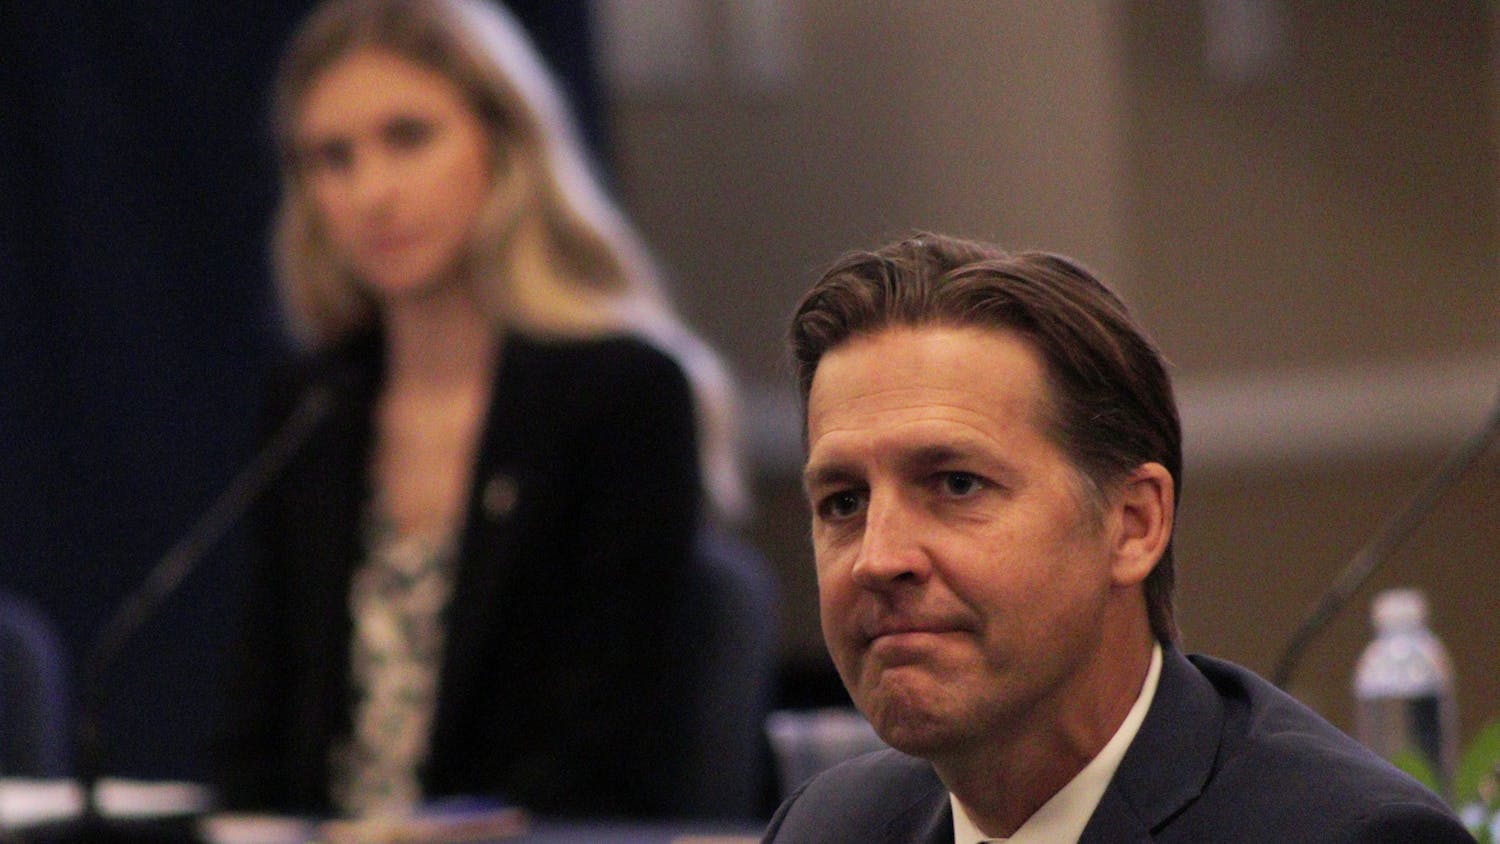 UF Presidential Finalist U.S. Sen. Ben Sasse, R-Nebraska, listens to public comment at the Board of Trustees meeting where his candidacy is being discussed at Emerson Alumni Hall Tuesday, Nov. 1, 2022.